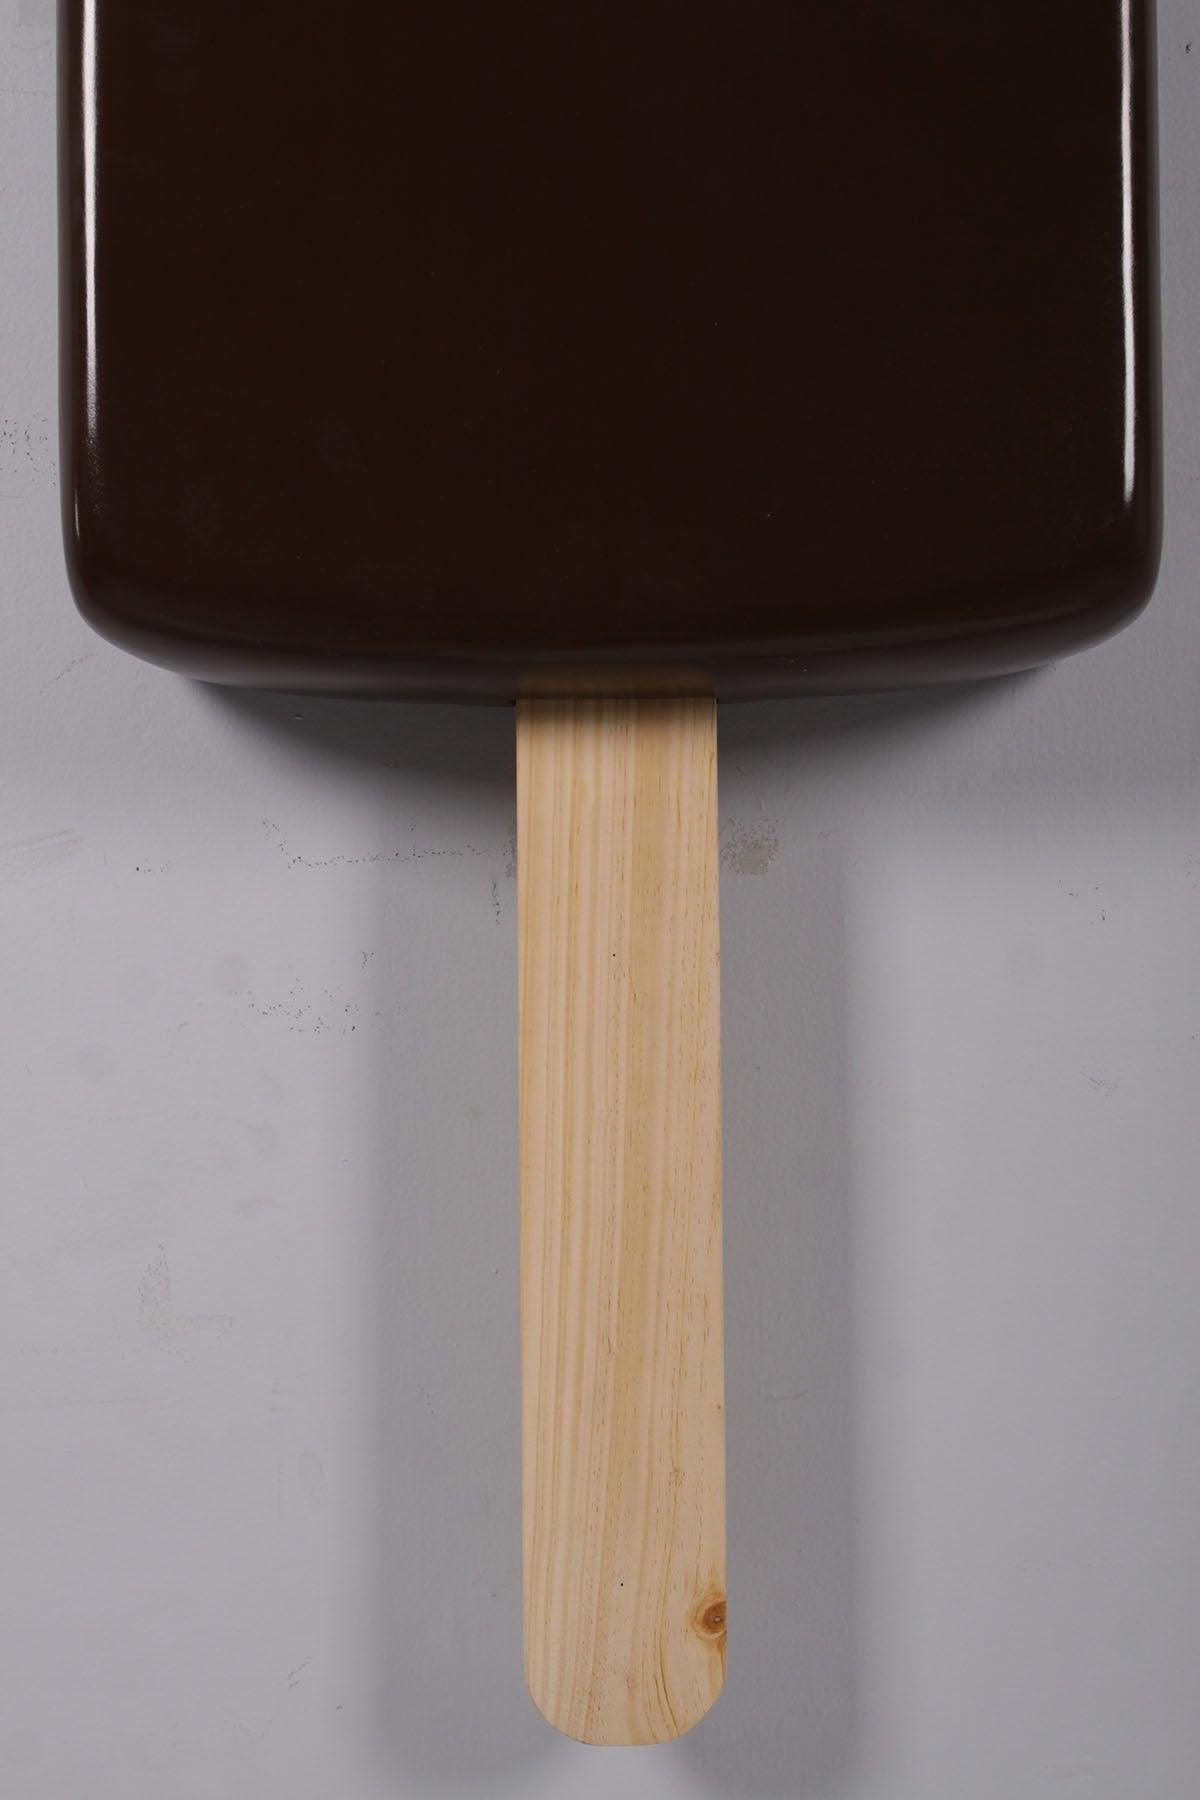 Small Hanging Chocolate Ice Cream Popsicle Statue